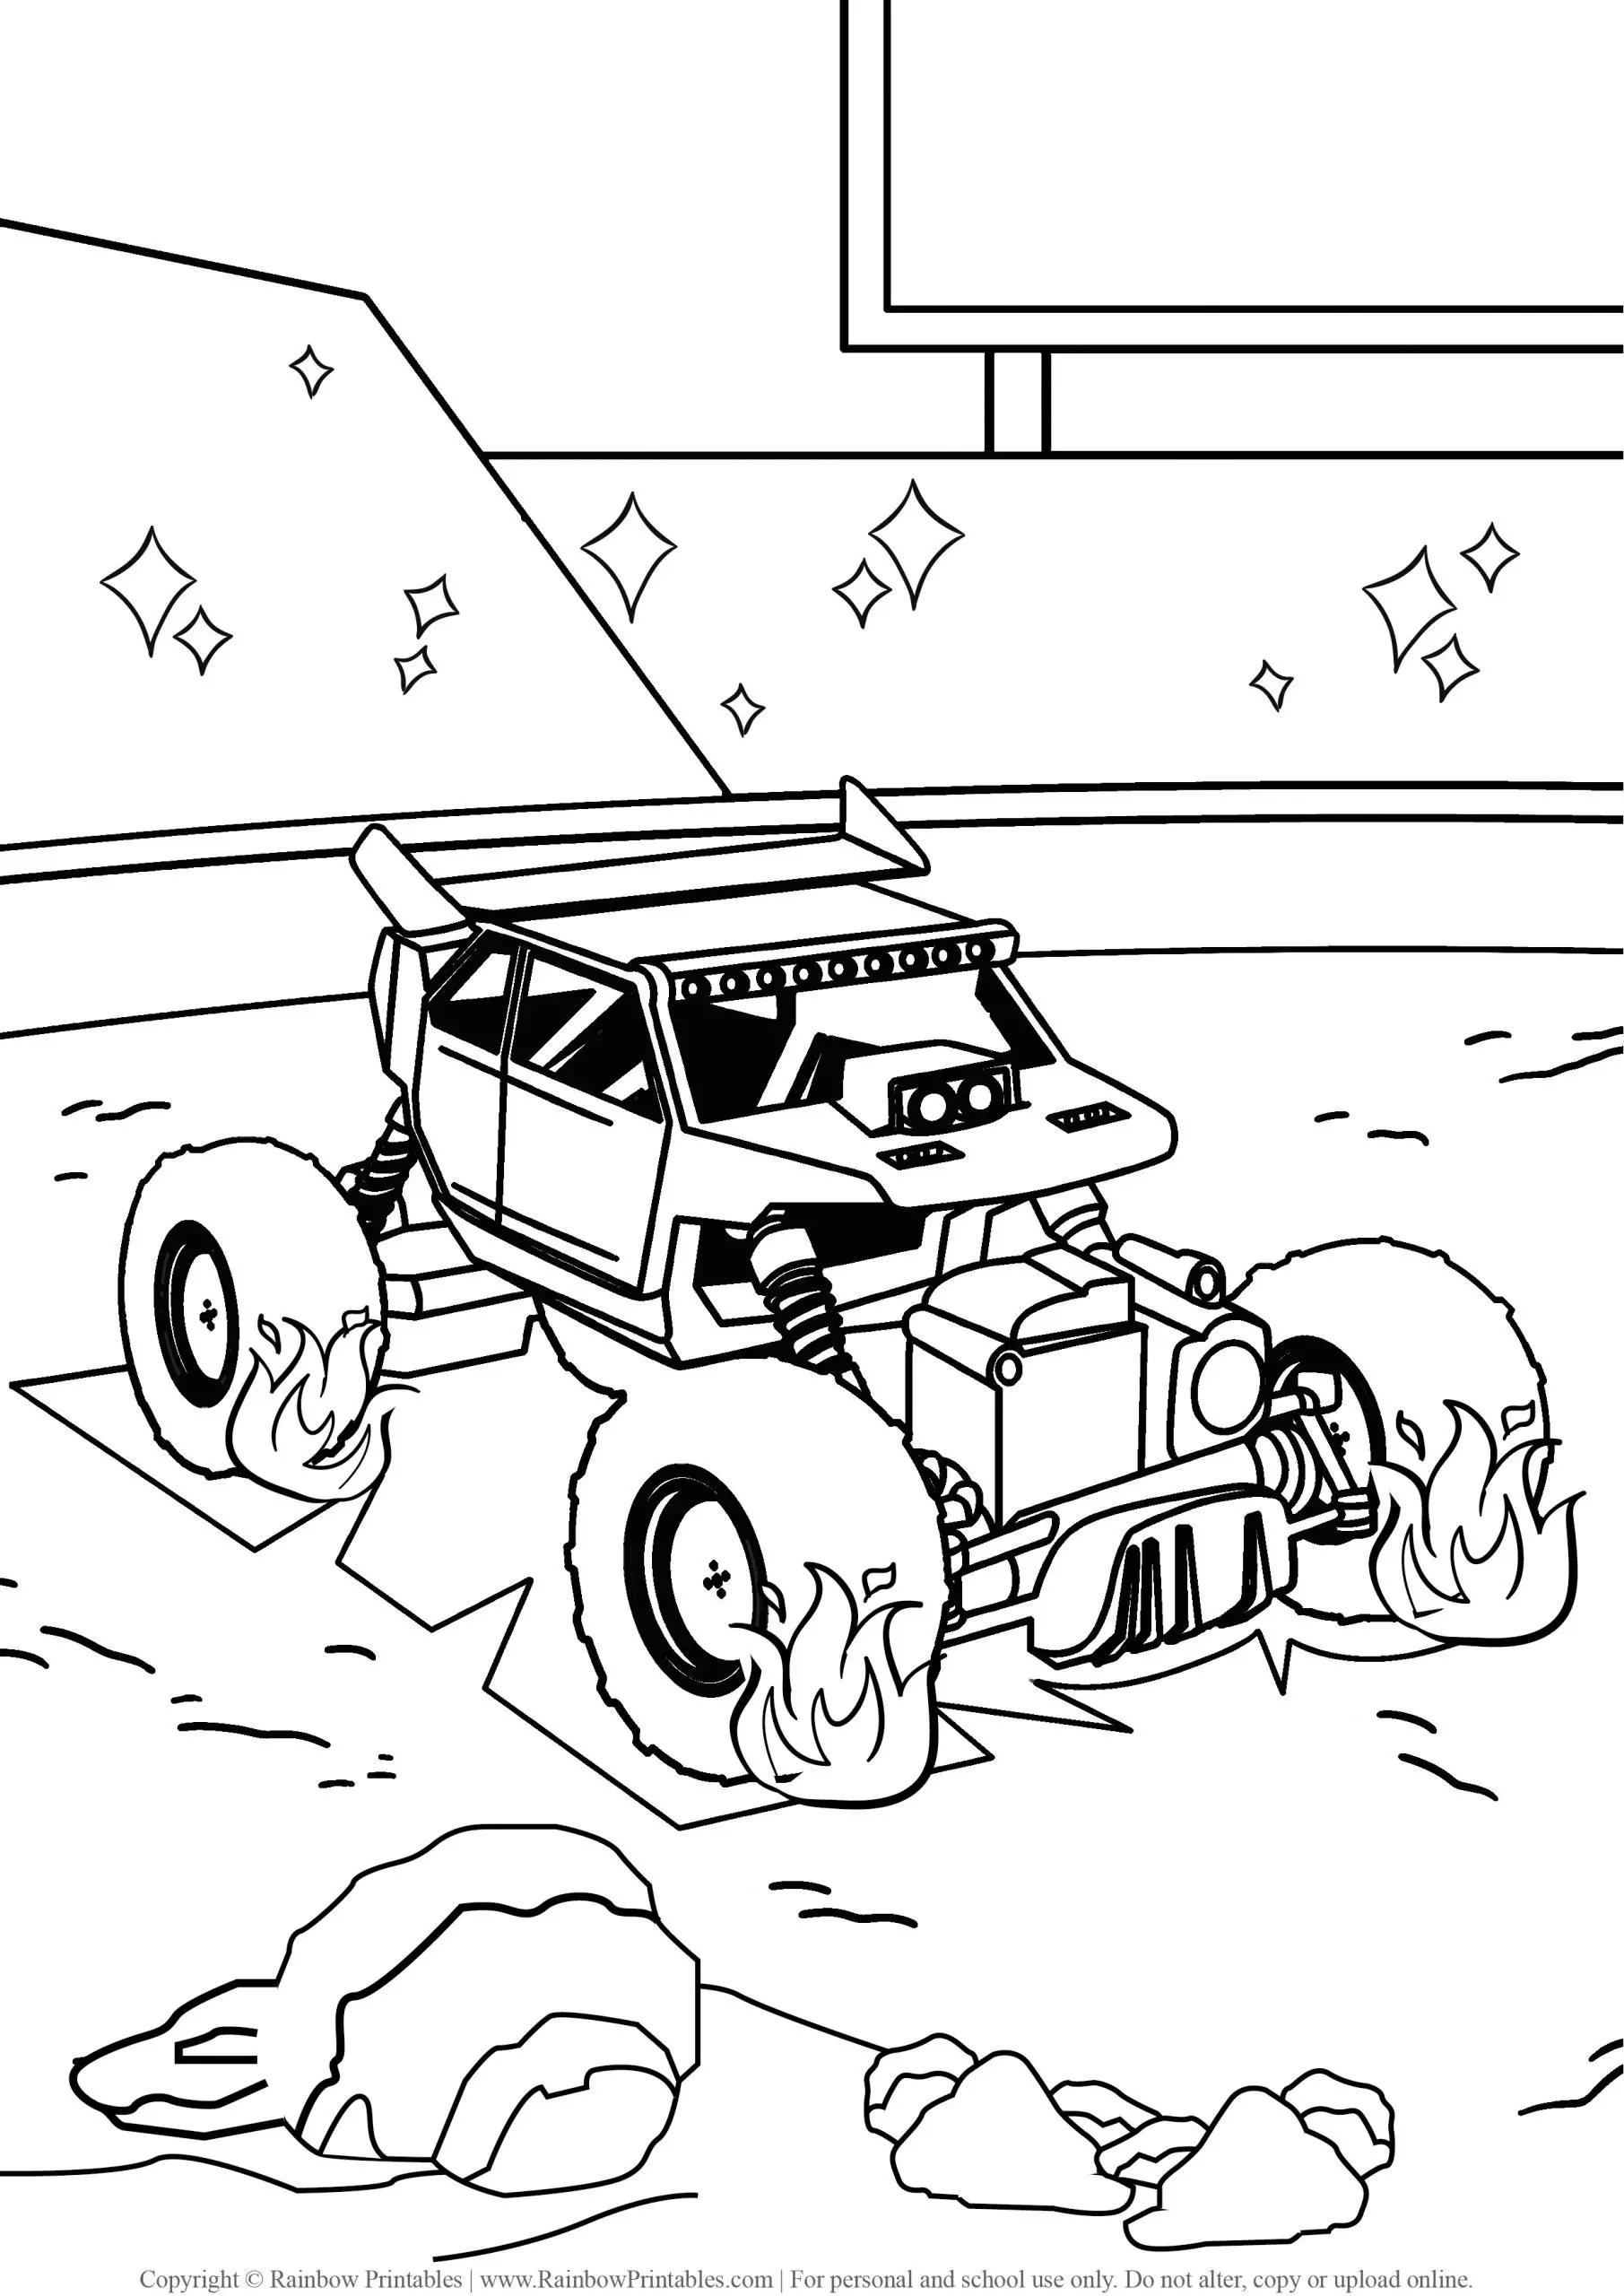 Monster Truck coloring pages, hot wheels, grave digger, jam, games drawing, monster truck party madness, coloring pages for boys, logo, USA America illustration